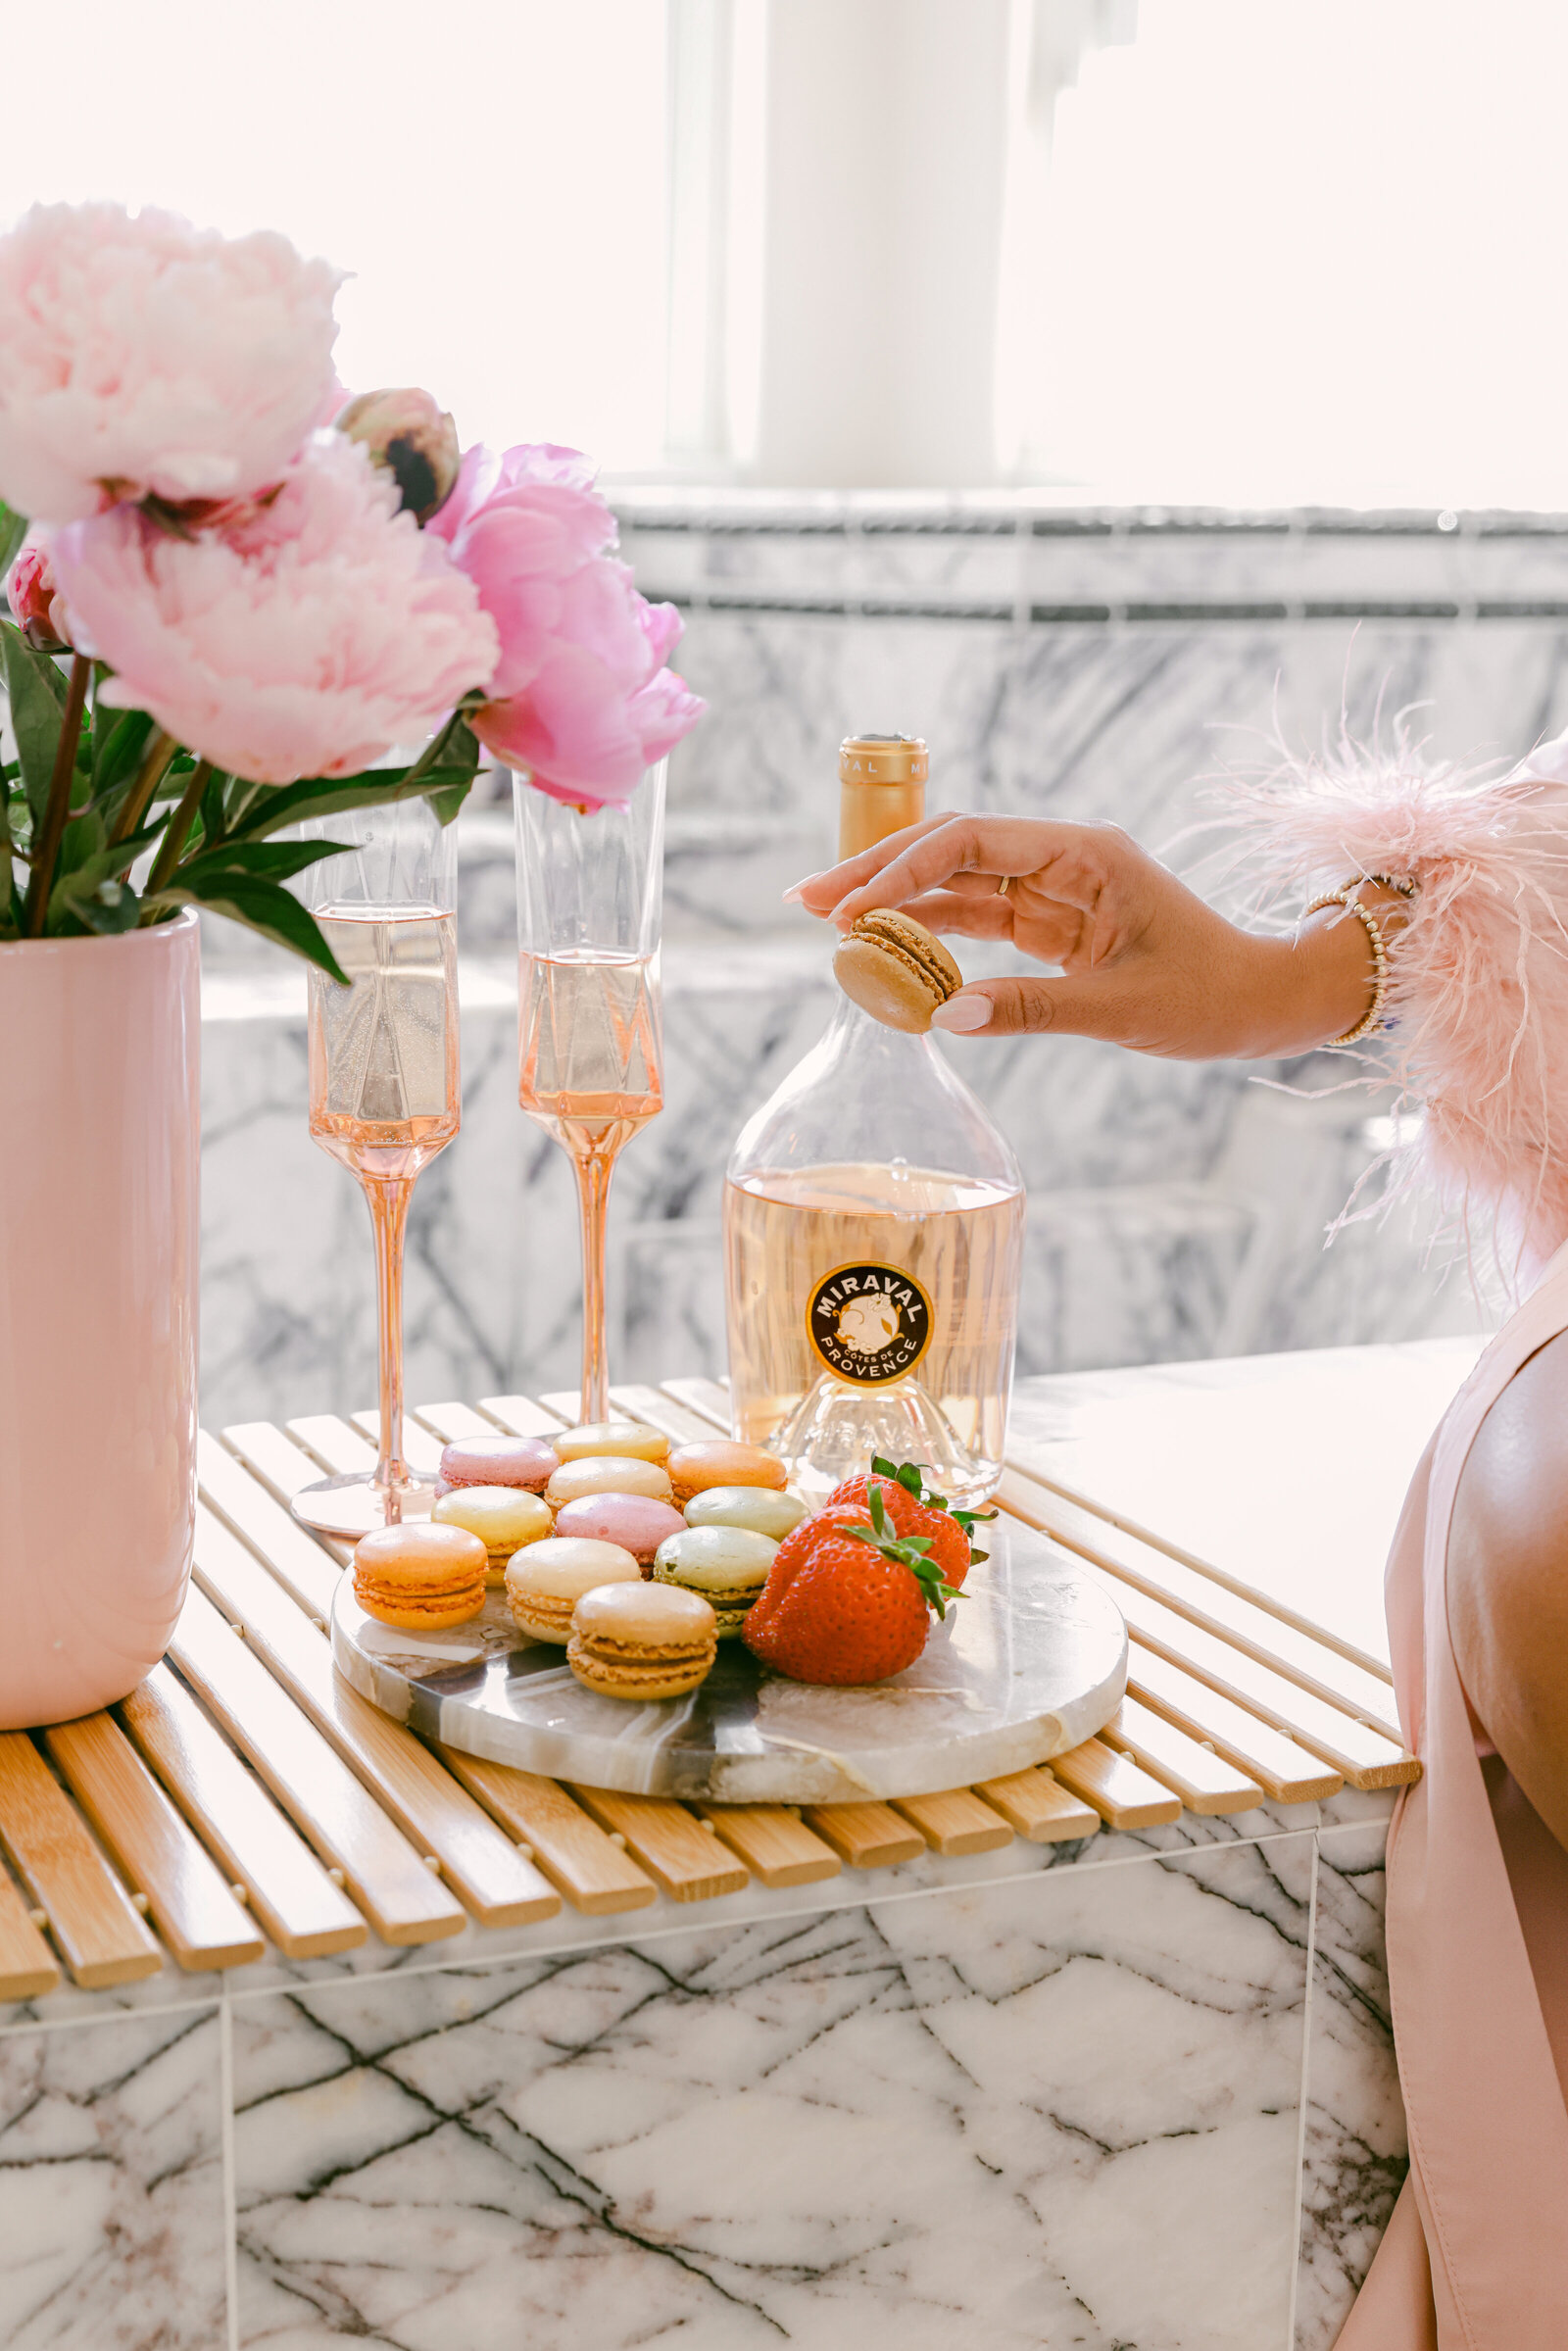 Chic Airbnb Marble bathtub luxe experience with champagne, macarons, and robe